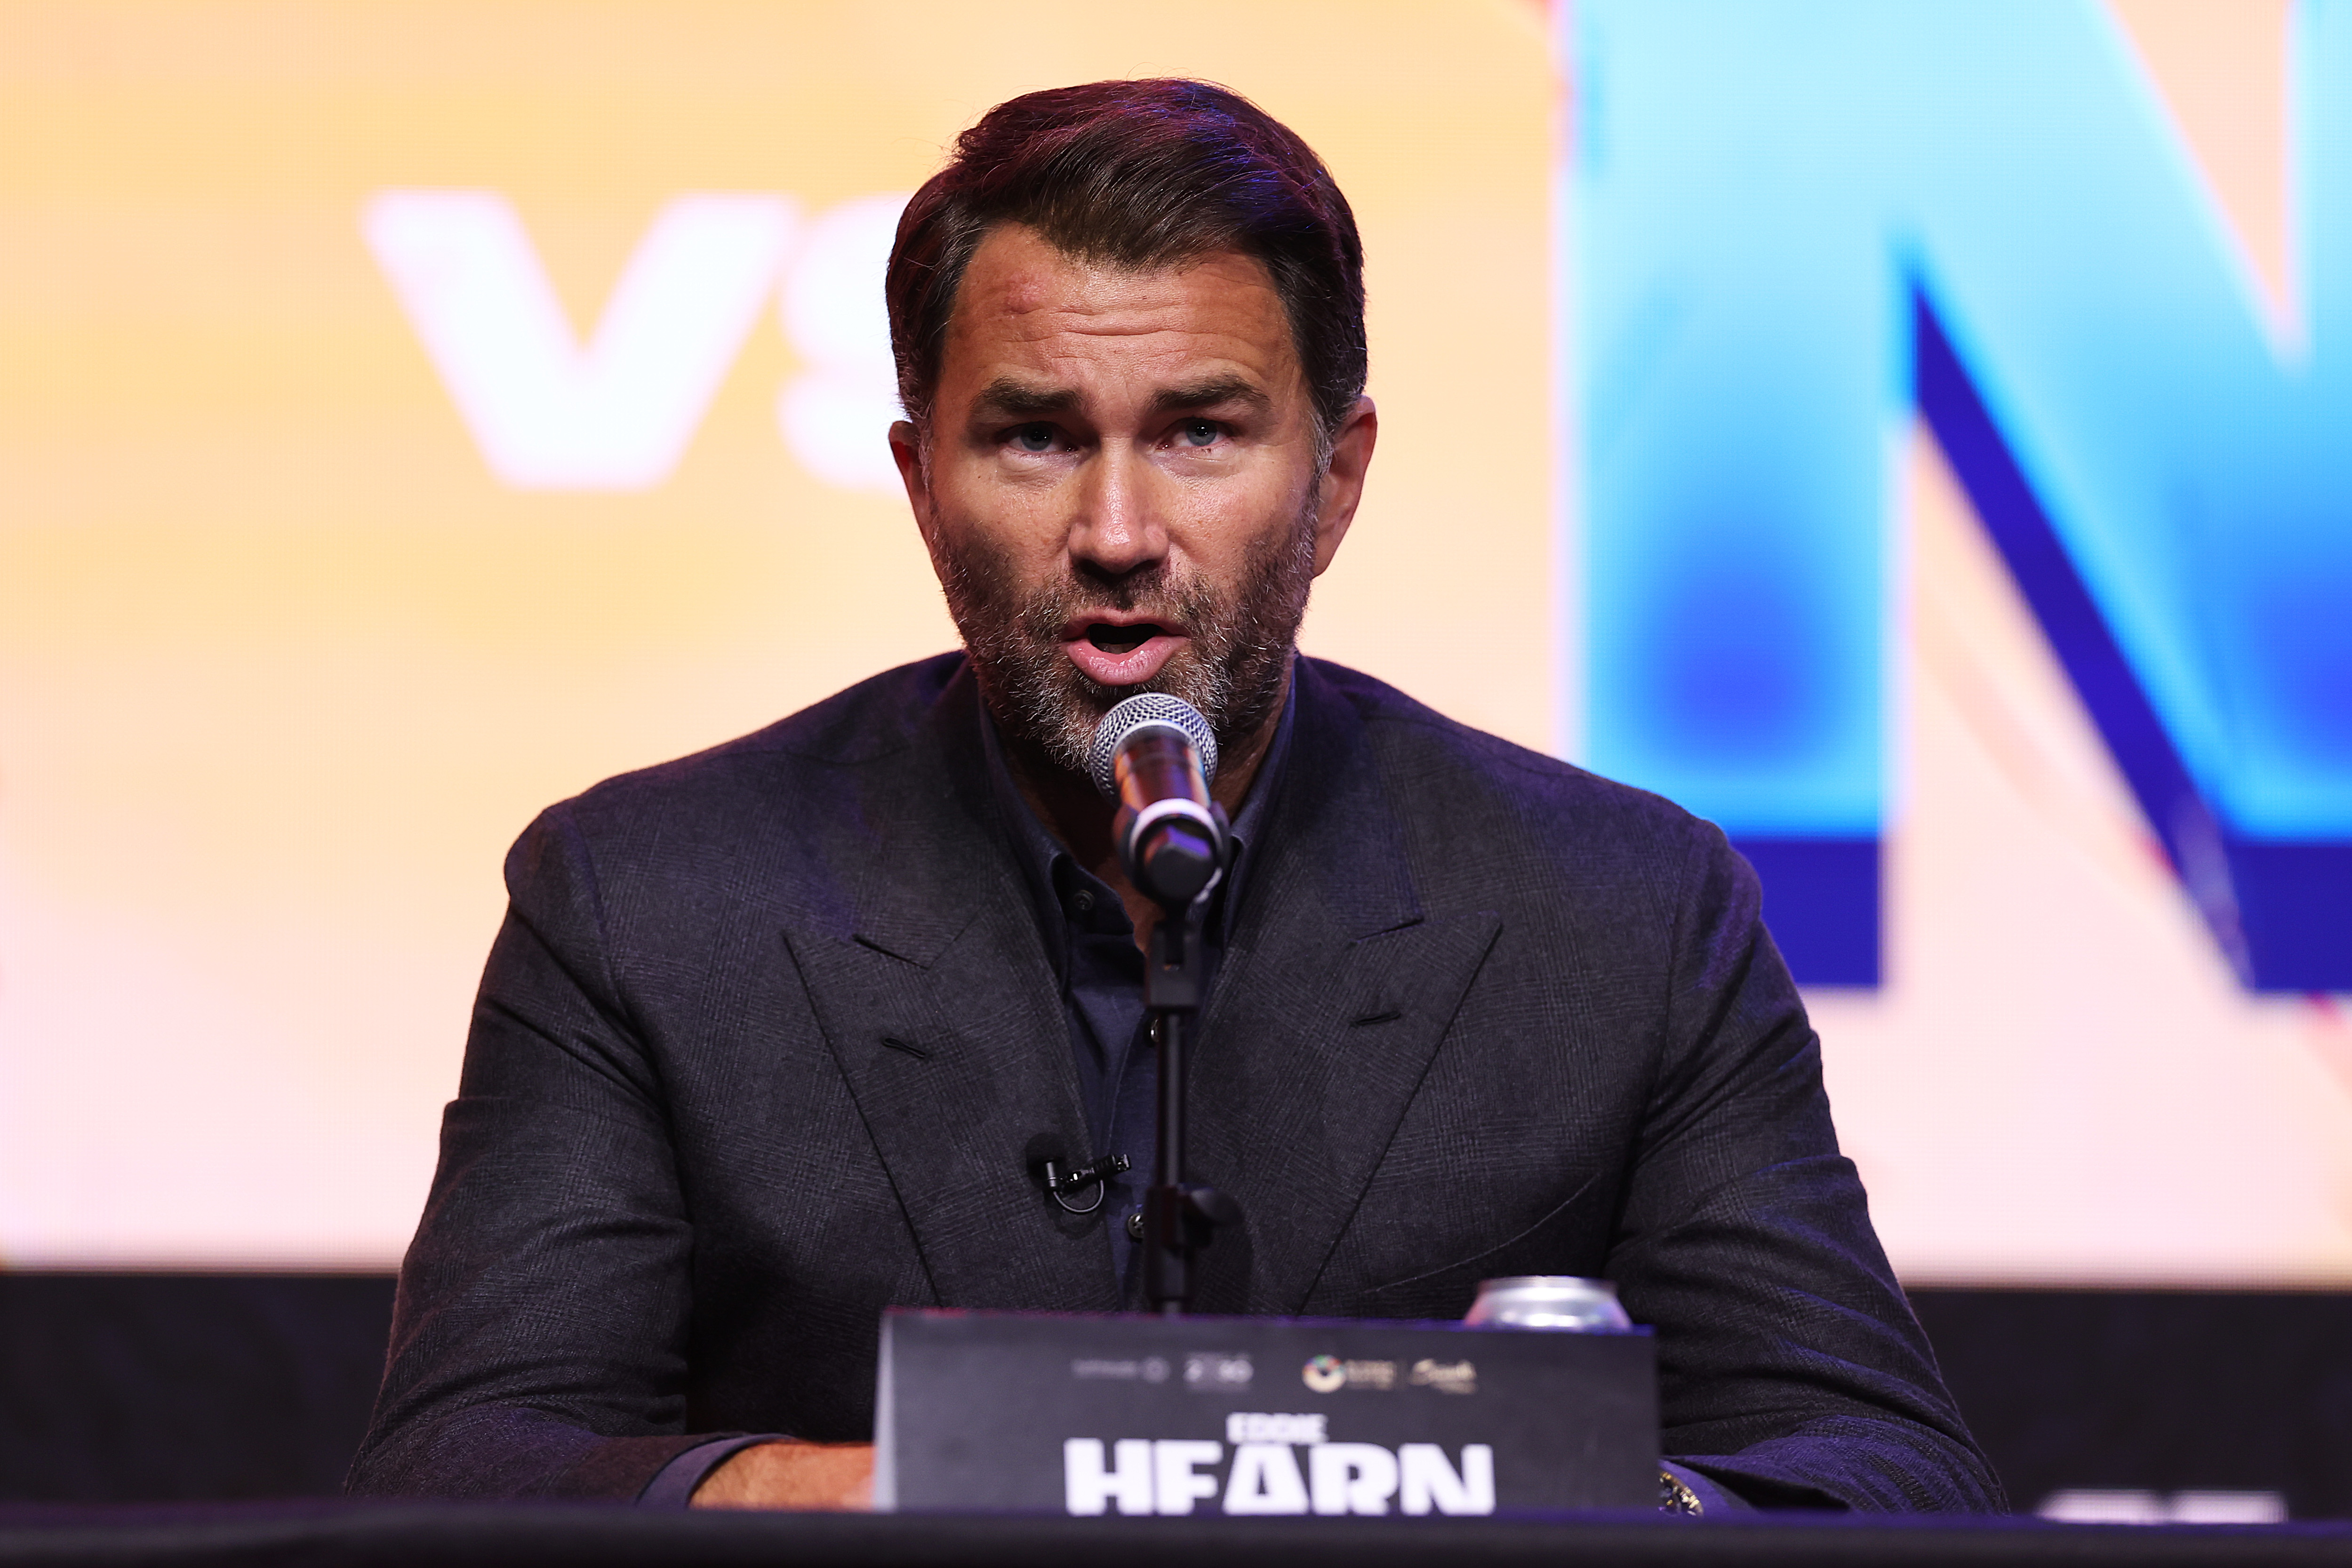 Eddie Hearn doesn’t expect good PPV numbers to come out of Thurman vs Tszyu.